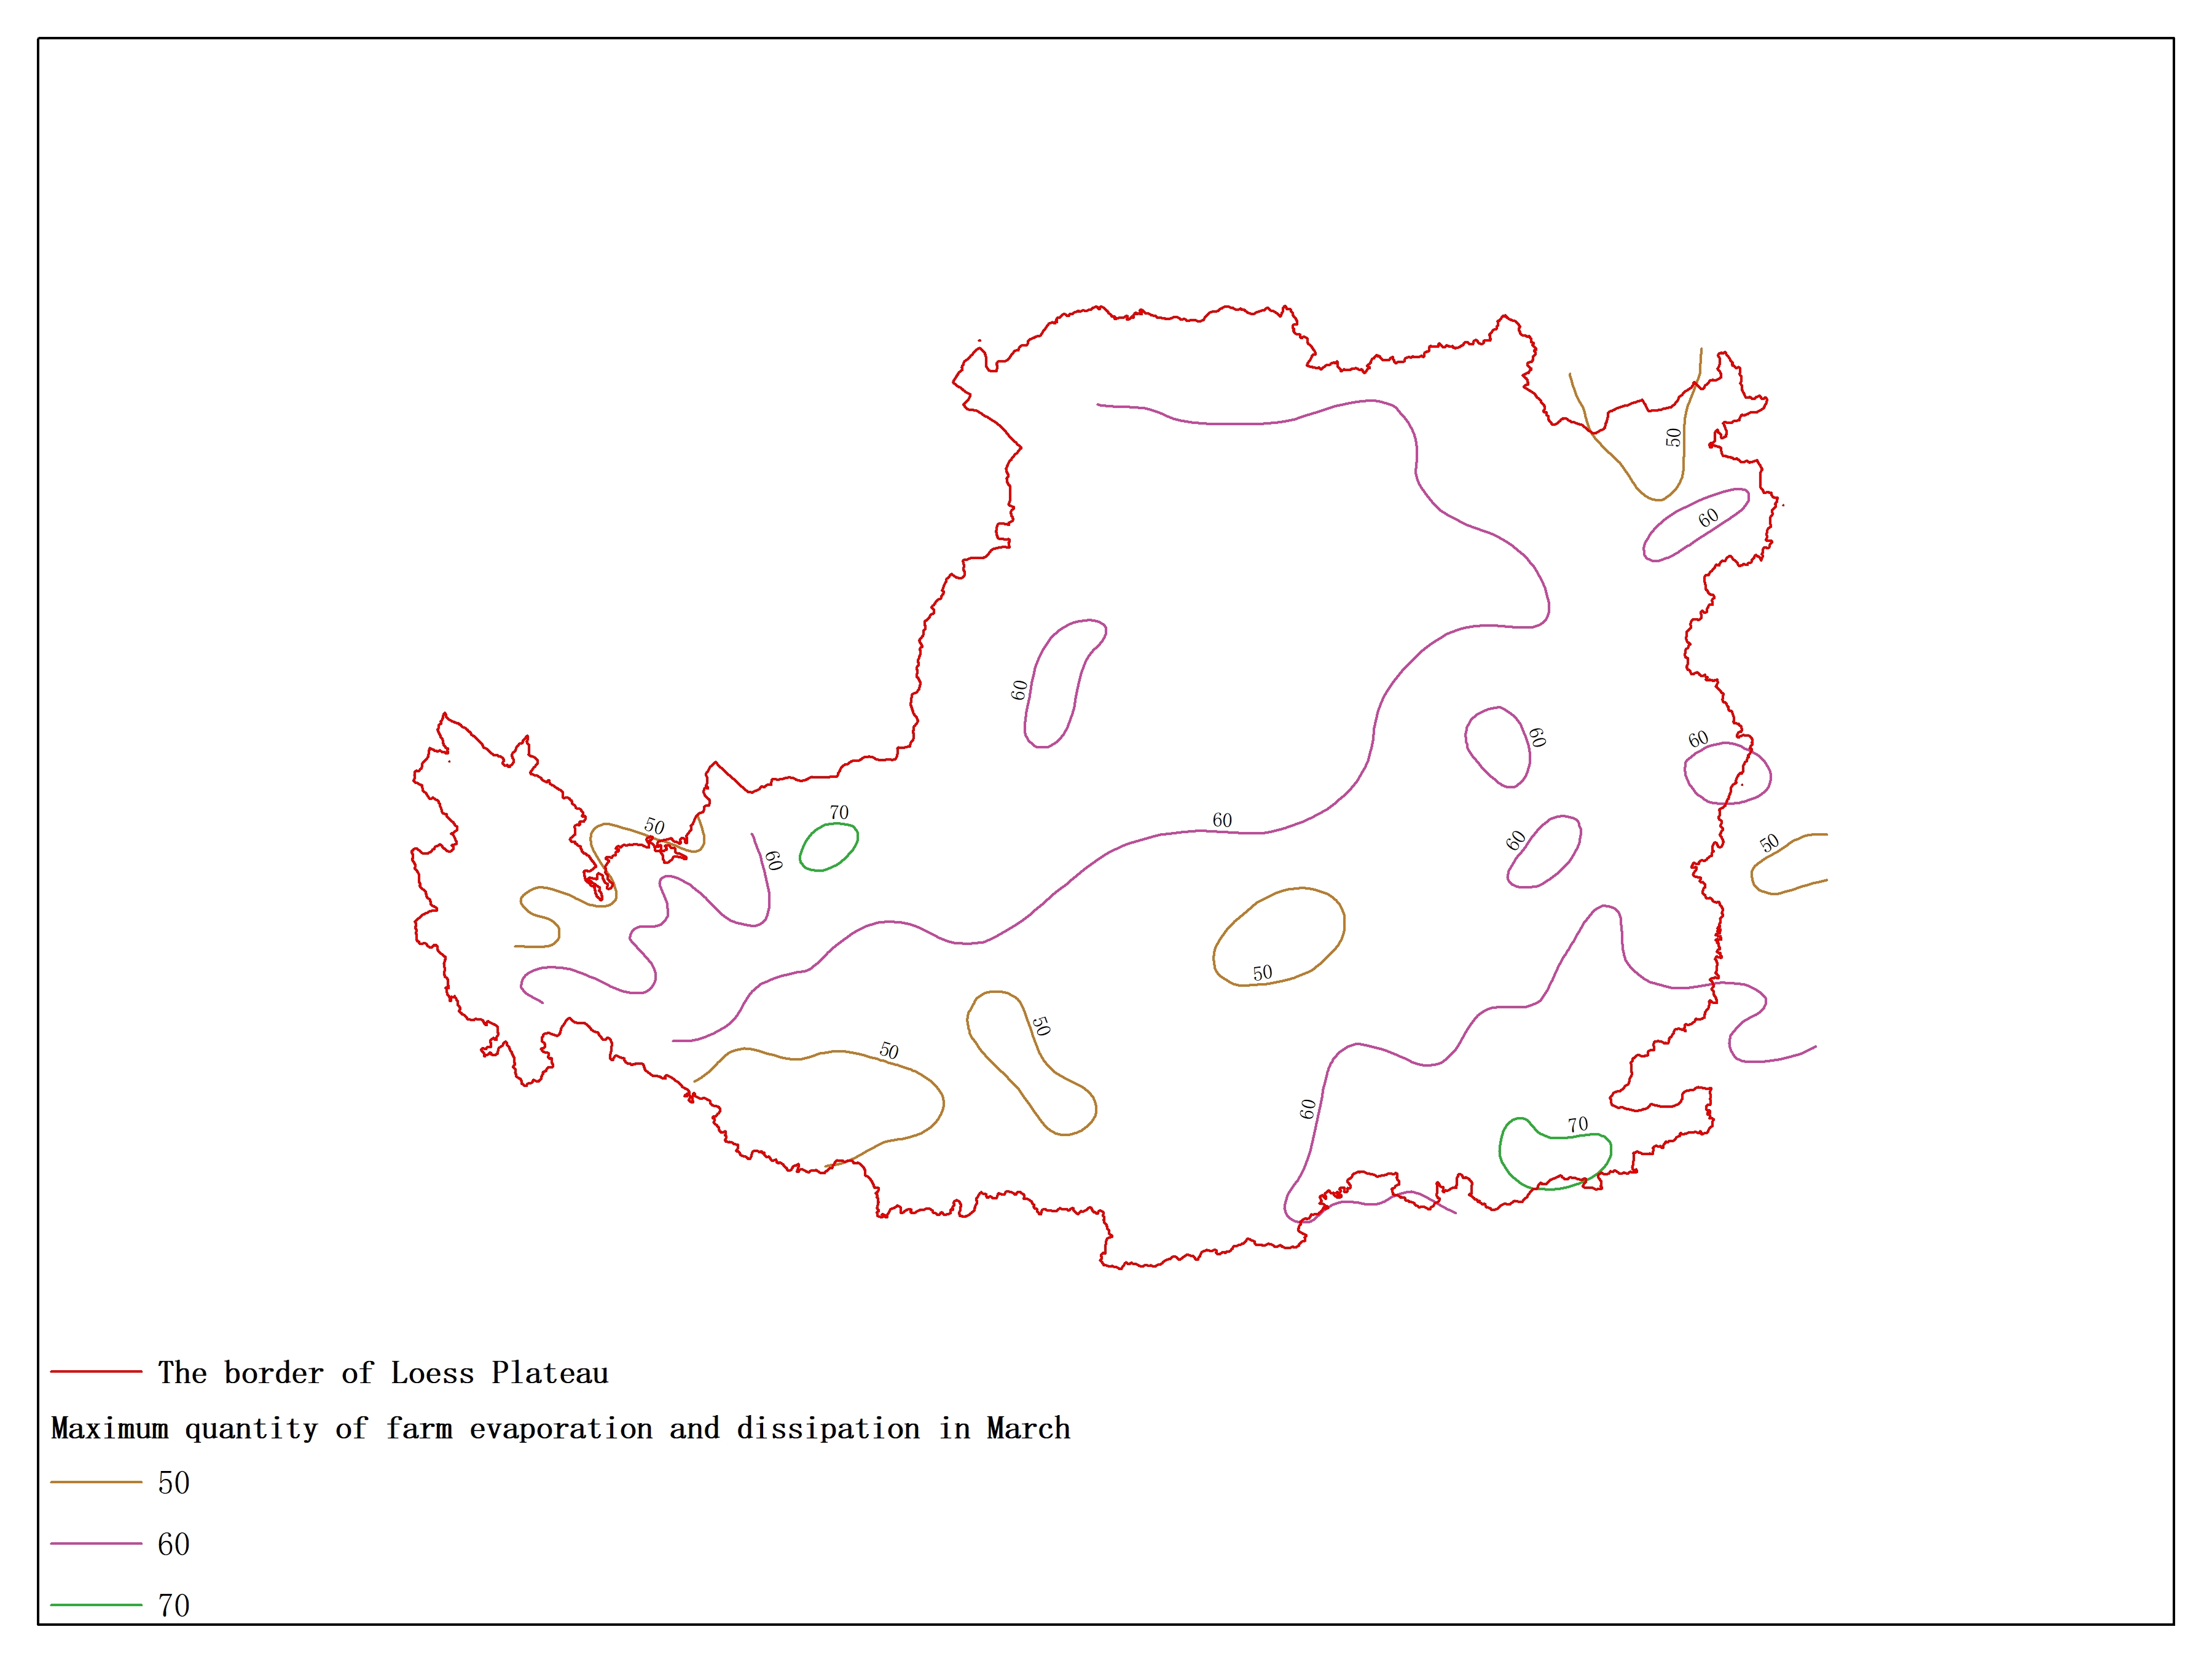 Agricultural climate resource atlas of Loess Plateau-Maximum quantity of farm evaporation and dissipation in March